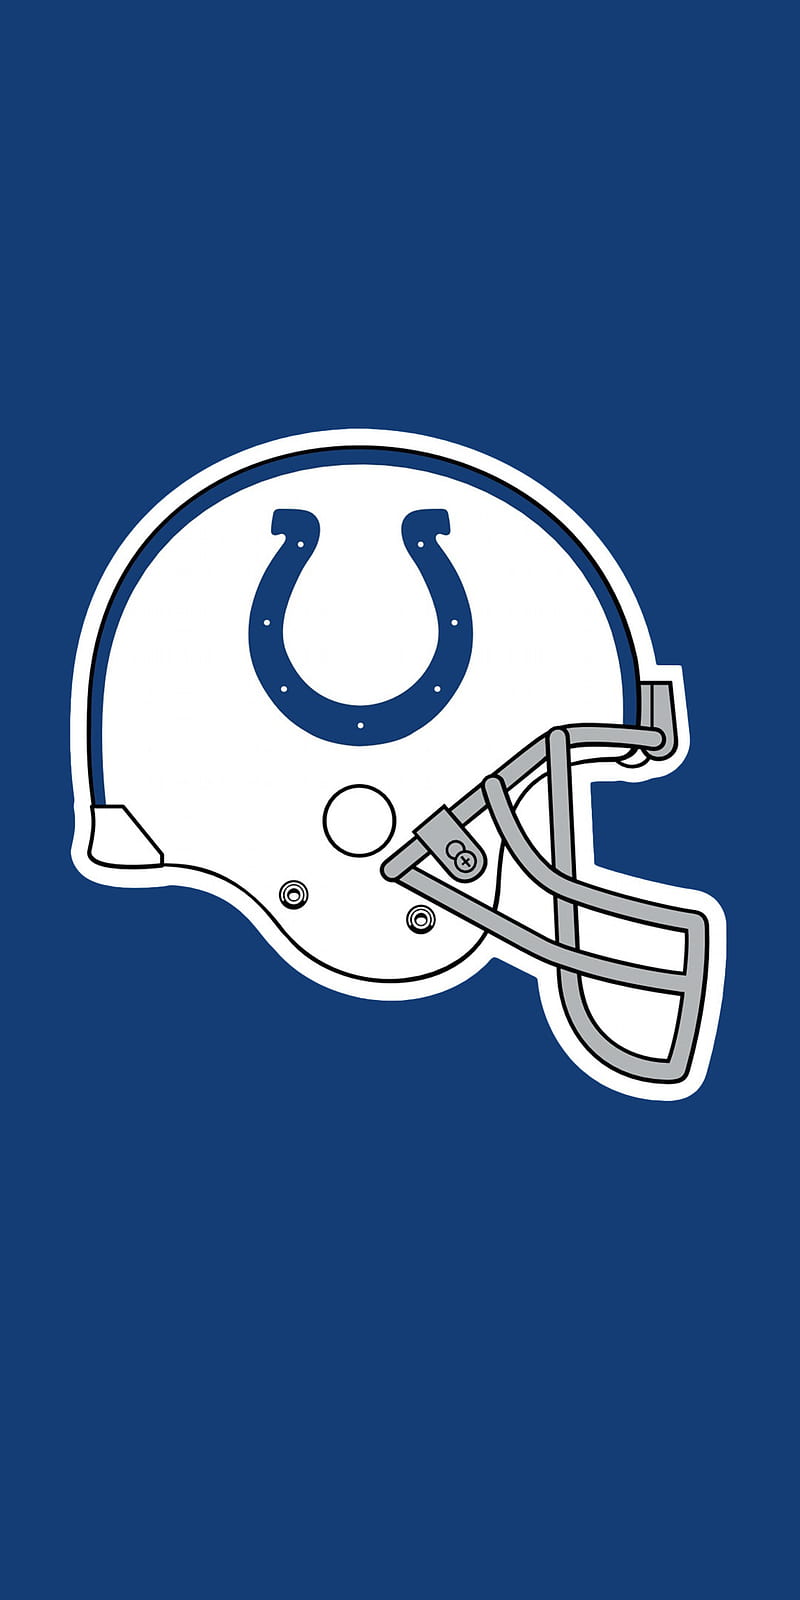 Indianapolis Colts iPhone 6 Wallpaper  2023 NFL Football Wallpapers  Nfl  football wallpaper Indianapolis colts logo Indianapolis colts